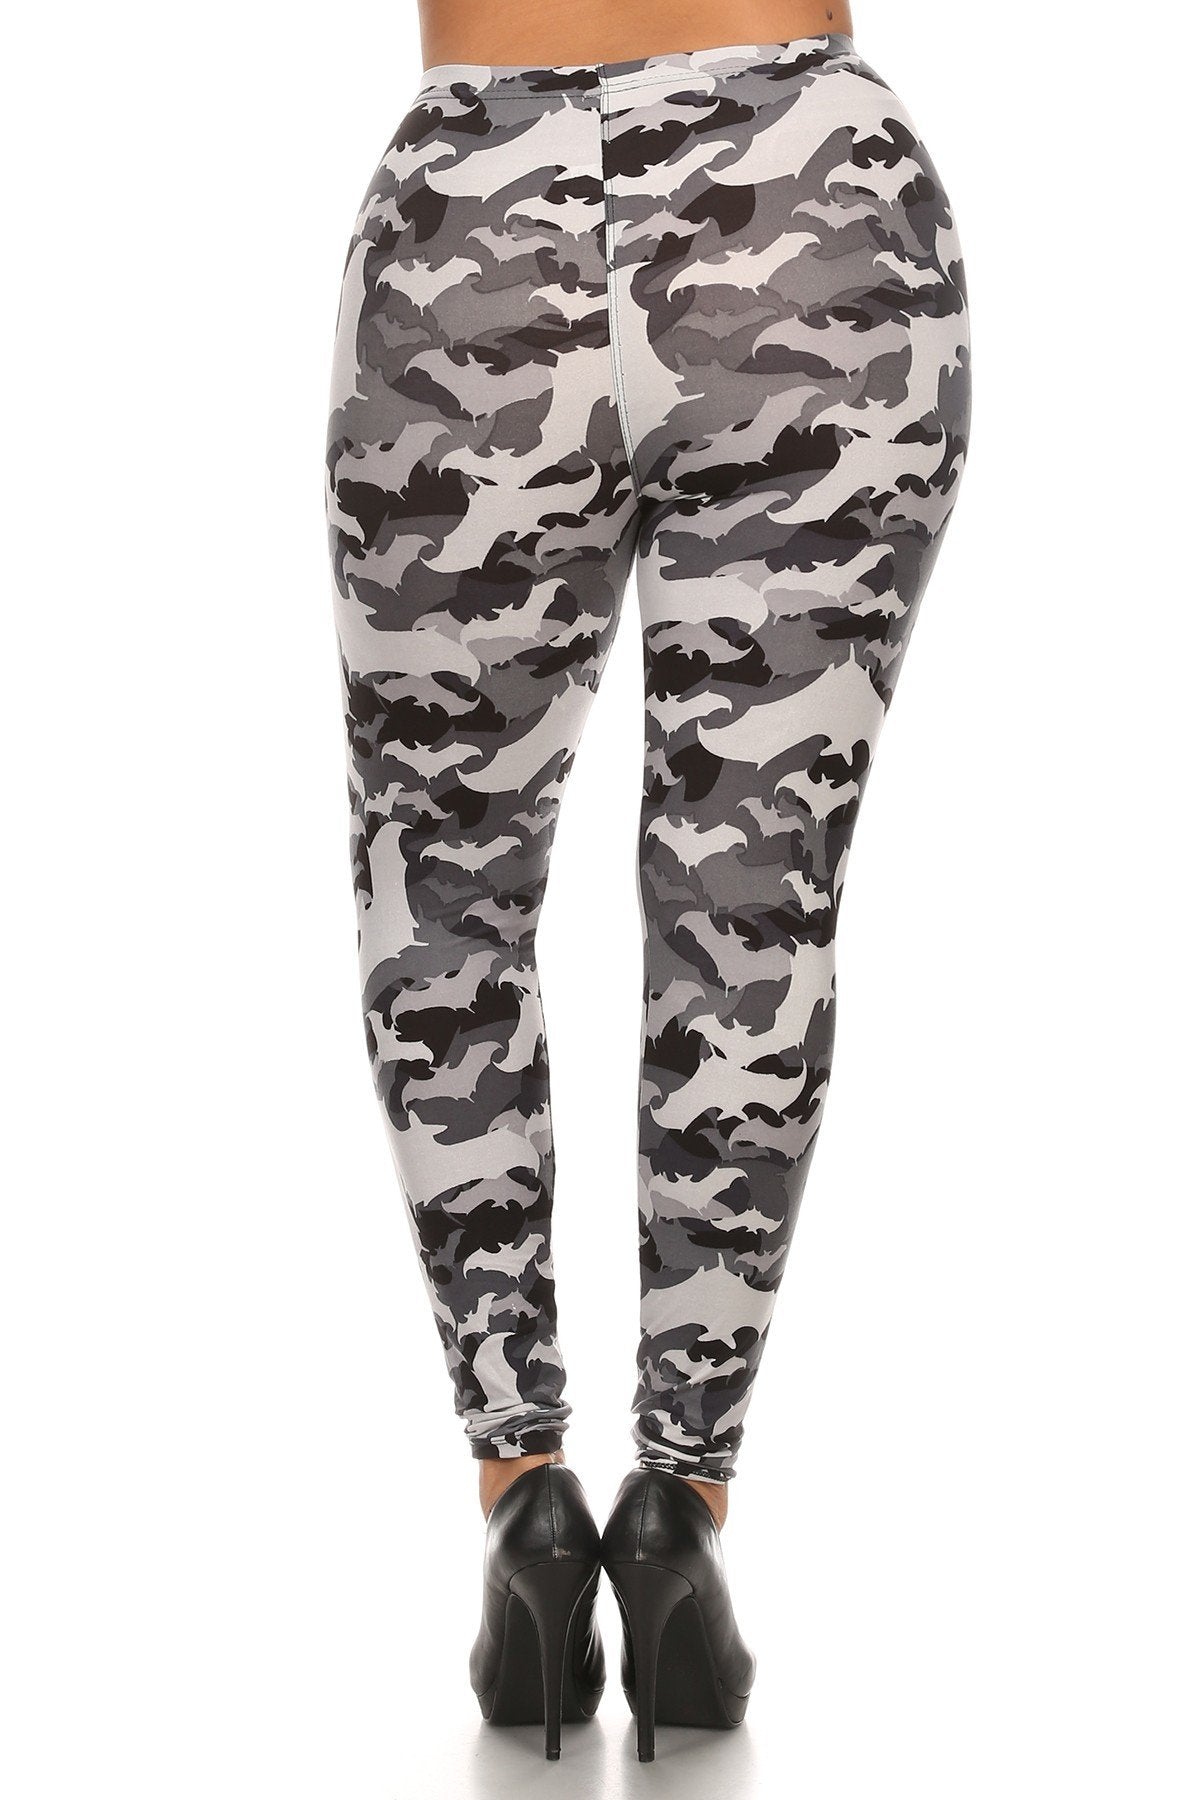 Plus Size Print, Full Length Leggings In A Slim Fitting Style With A Banded High Waist. - LOLA LUXE